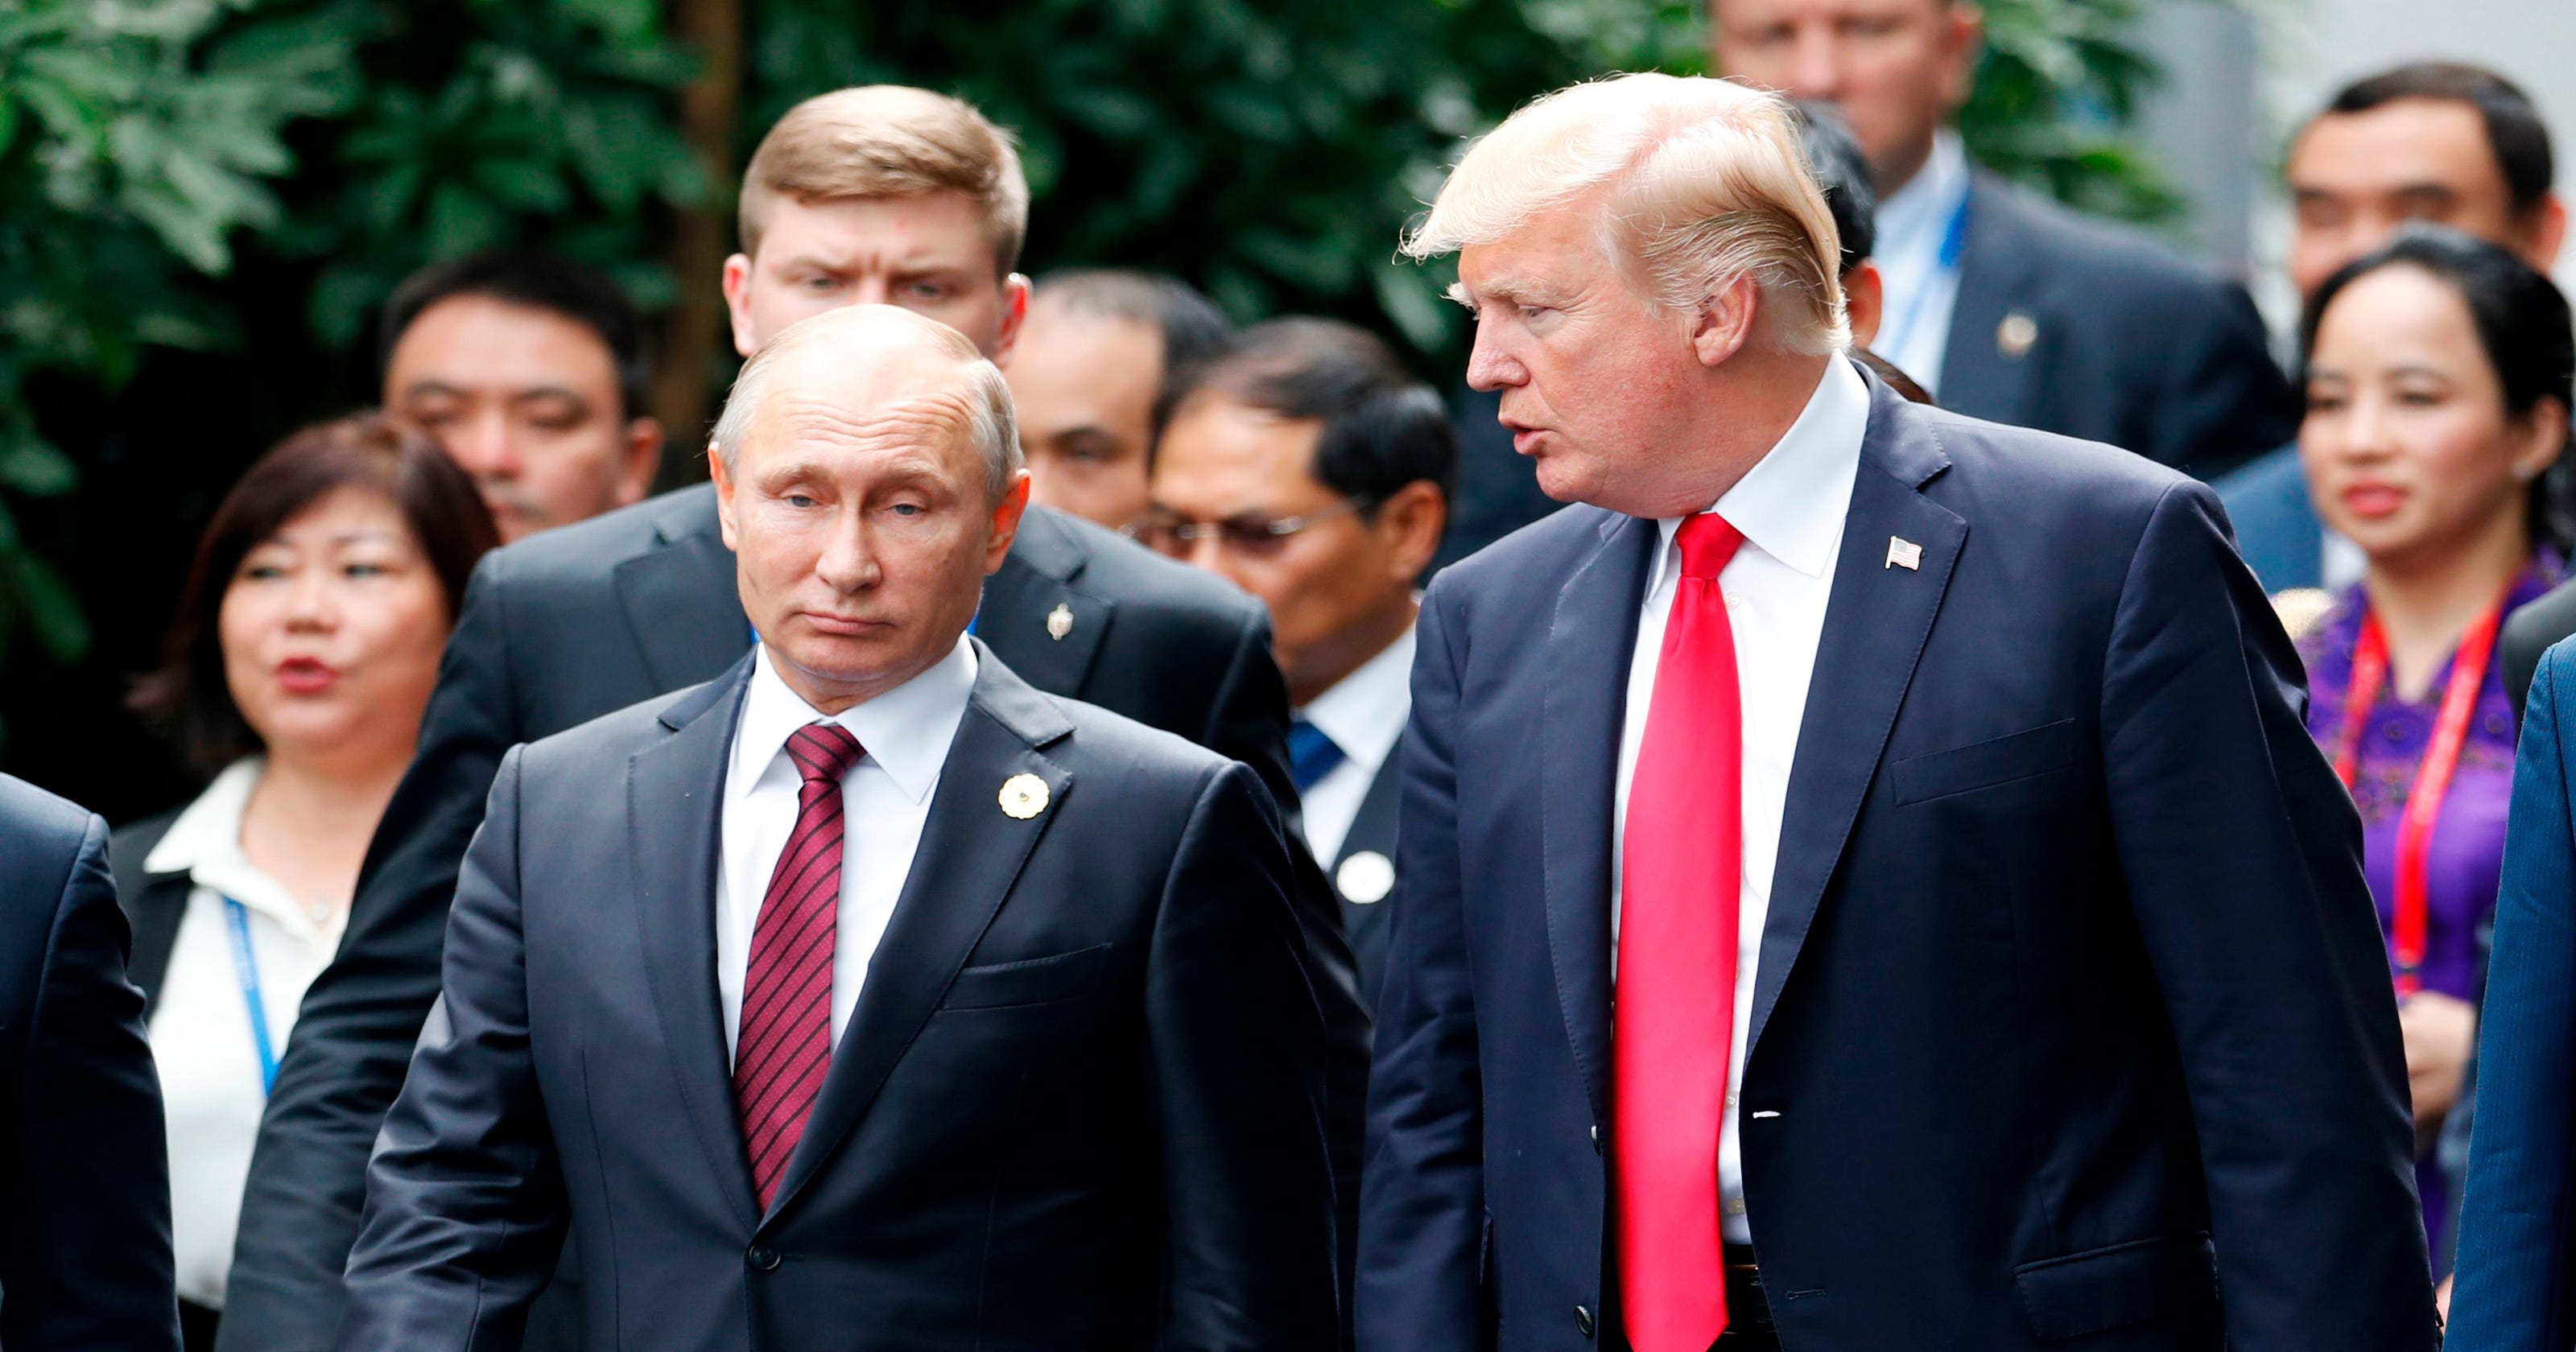 Donald Trump S Summit With Vladimir Putin Overshadowed By A New Round Of Indictments